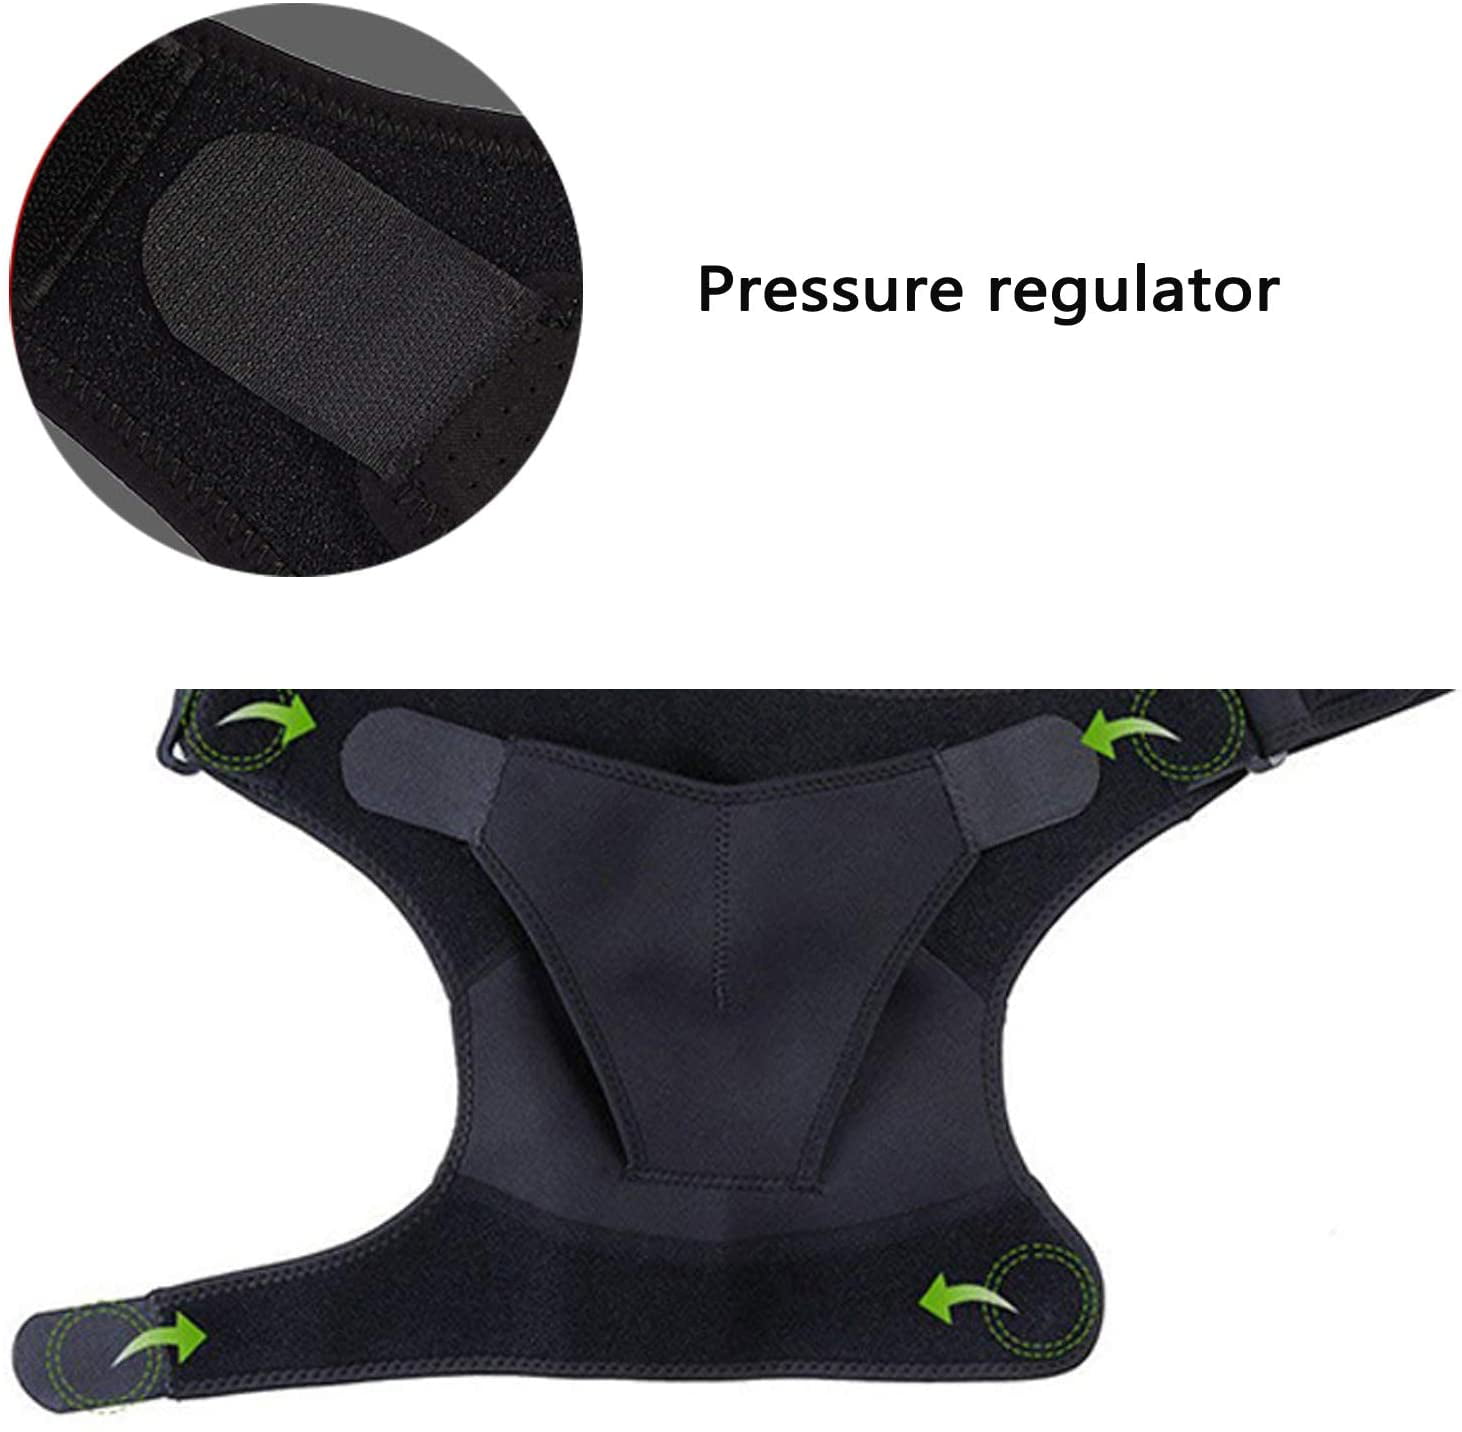  Footpathemed Compression Shoulder Brace, Foot Pathemed Shoulder  Brace for Men, Professional Rotator Cuff Support Brace for Pain Relief  Dislocation, Compression Sleeve for Shoulder Pain Relief (1PC) : Health &  Household